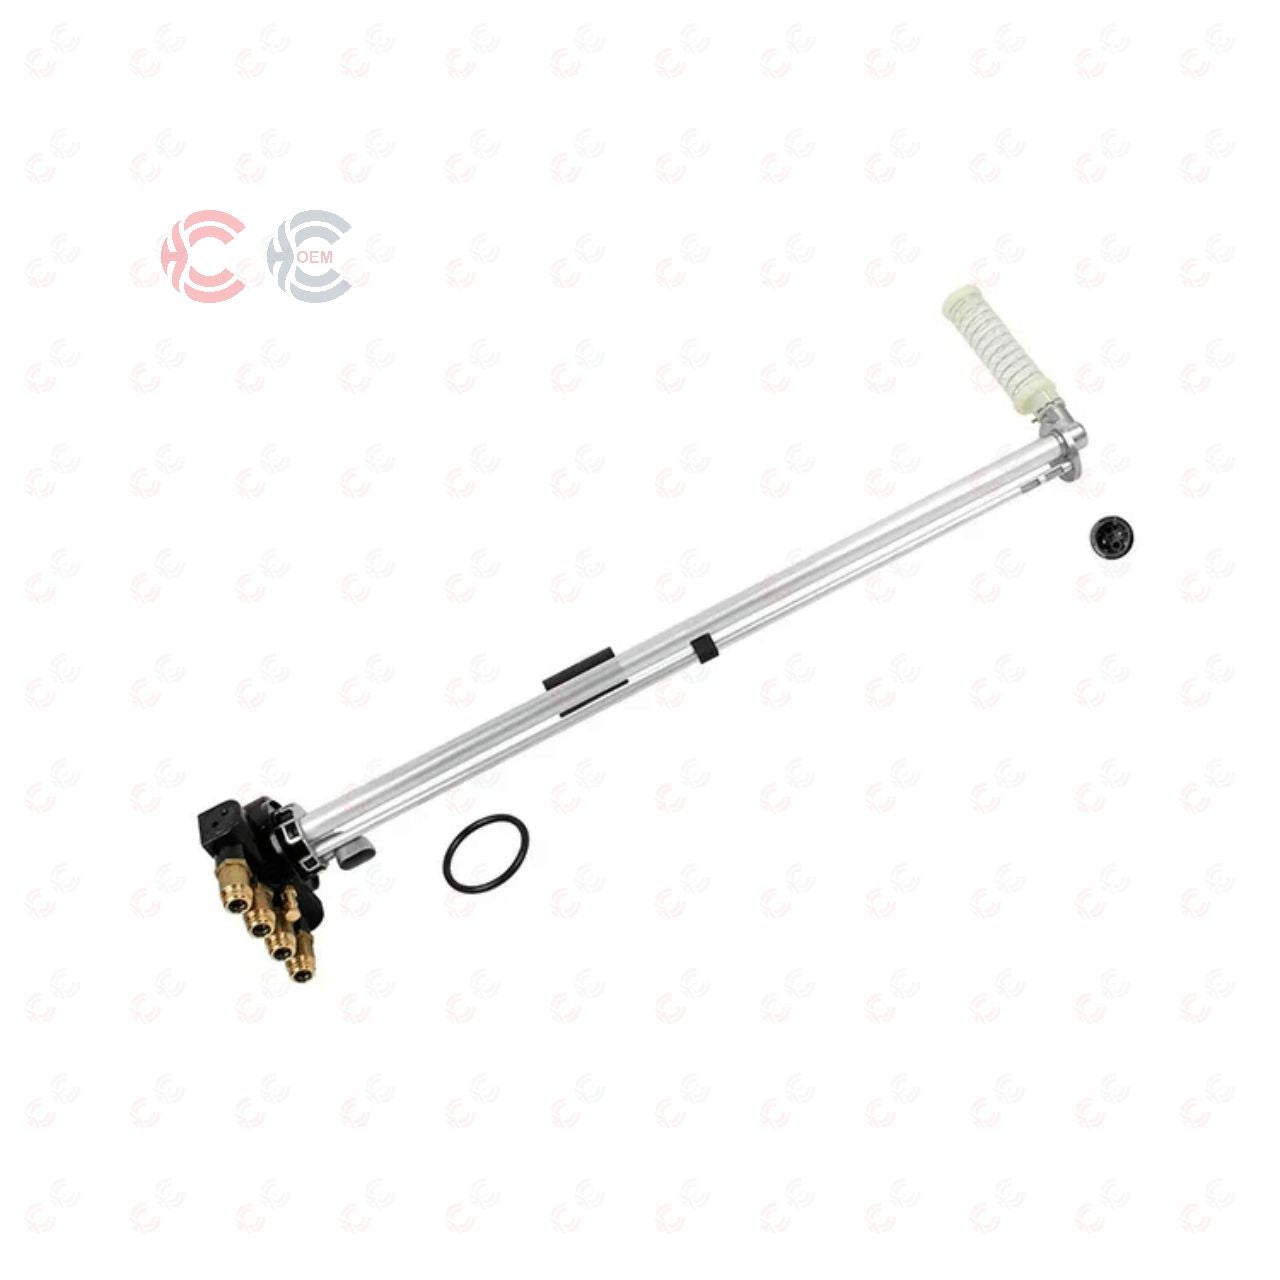 OEM: 1548262Material: ABS metalColor: Black GoldenOrigin: Made in ChinaWeight: 1000gPacking List: 1* Fuel Level Sensor More ServiceWe can provide OEM Manufacturing serviceWe can Be your one-step solution for Auto PartsWe can provide technical scheme for you Feel Free to Contact Us, we will get back to you as soon as possible.